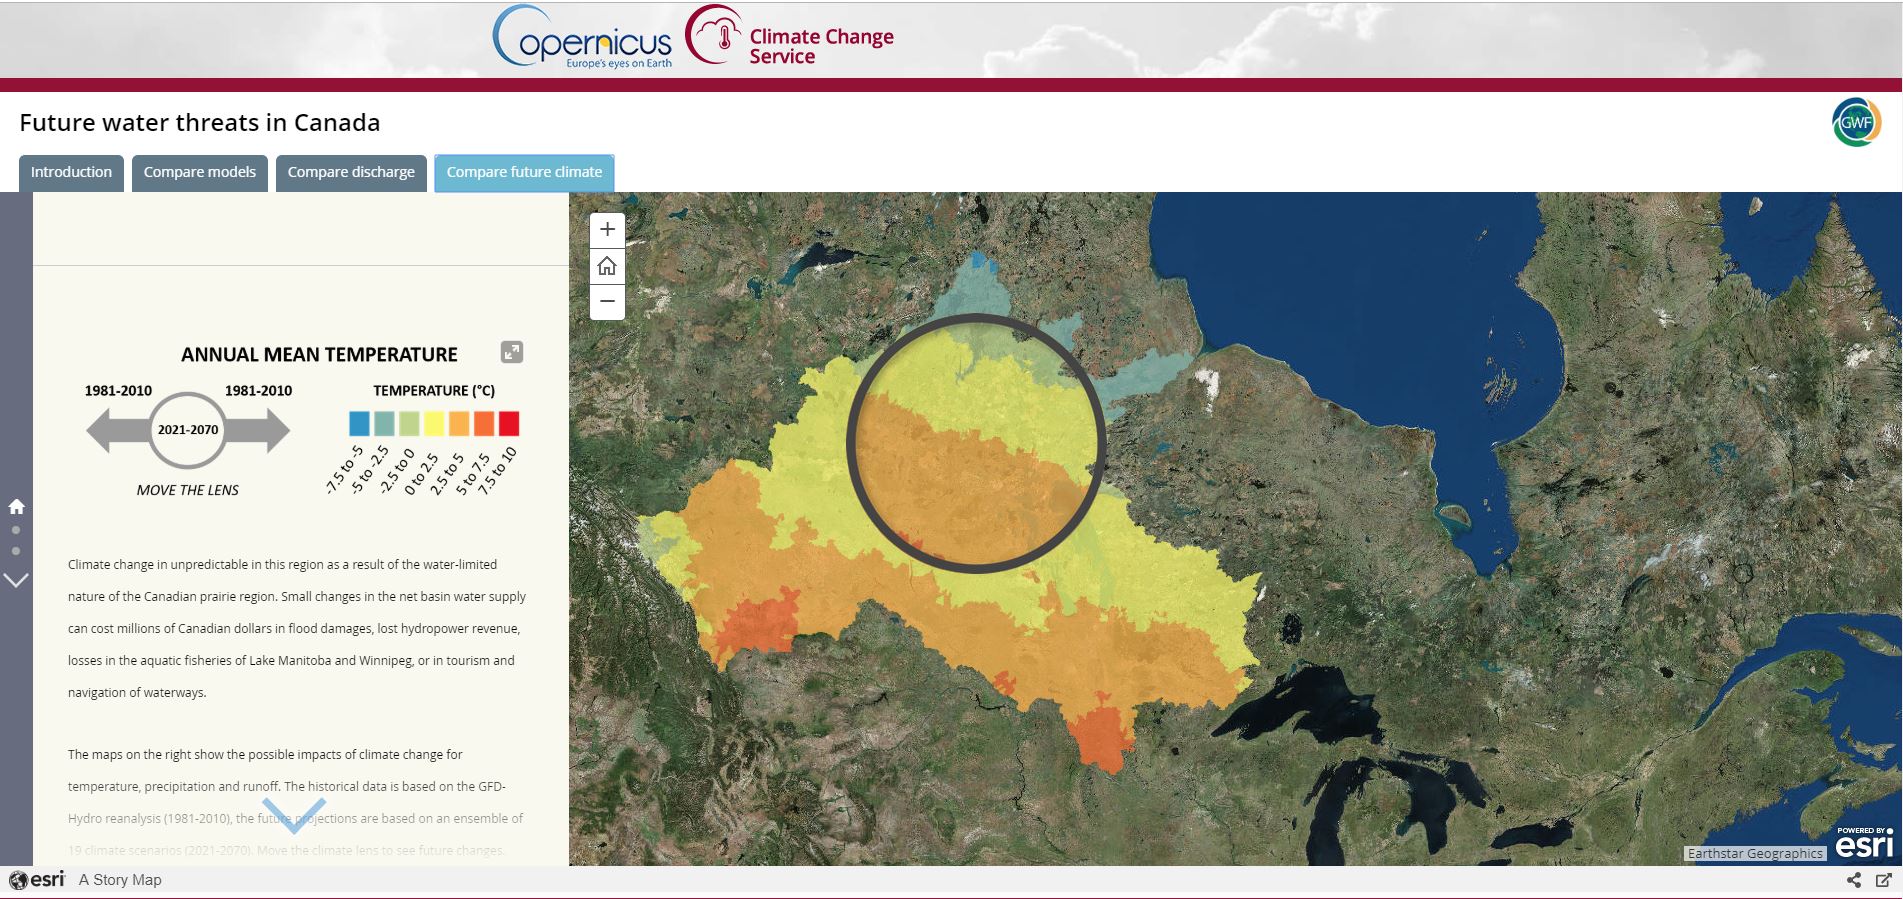 A screenshot from the Canadian Showcase for the Copernicus Climate Change Service